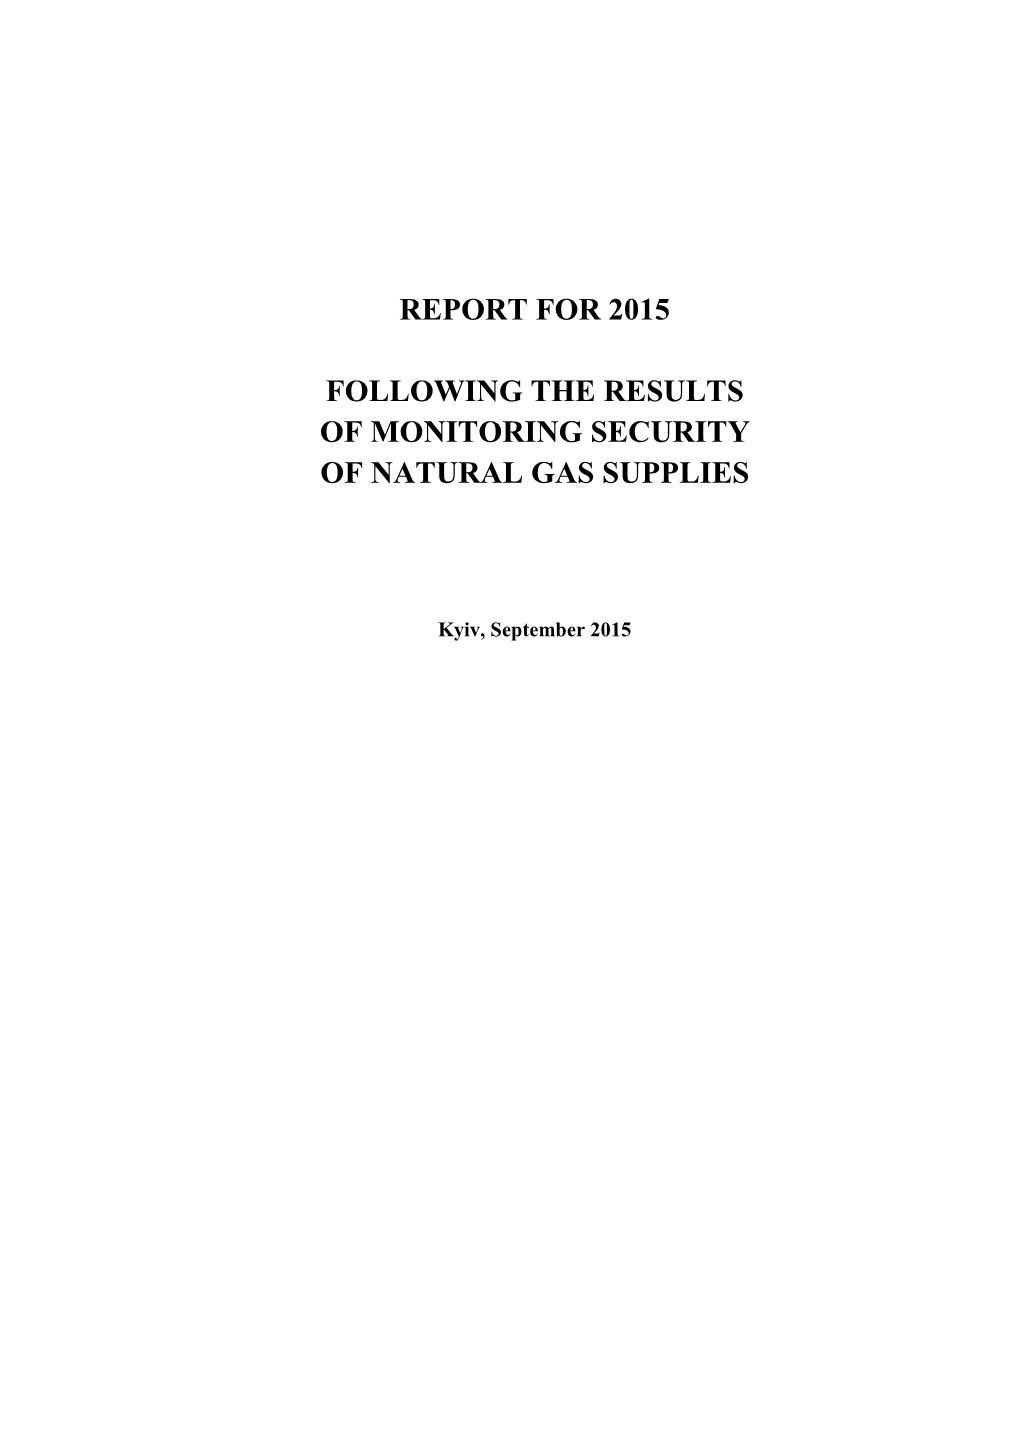 Report for 2015 Following the Results of Monitoring